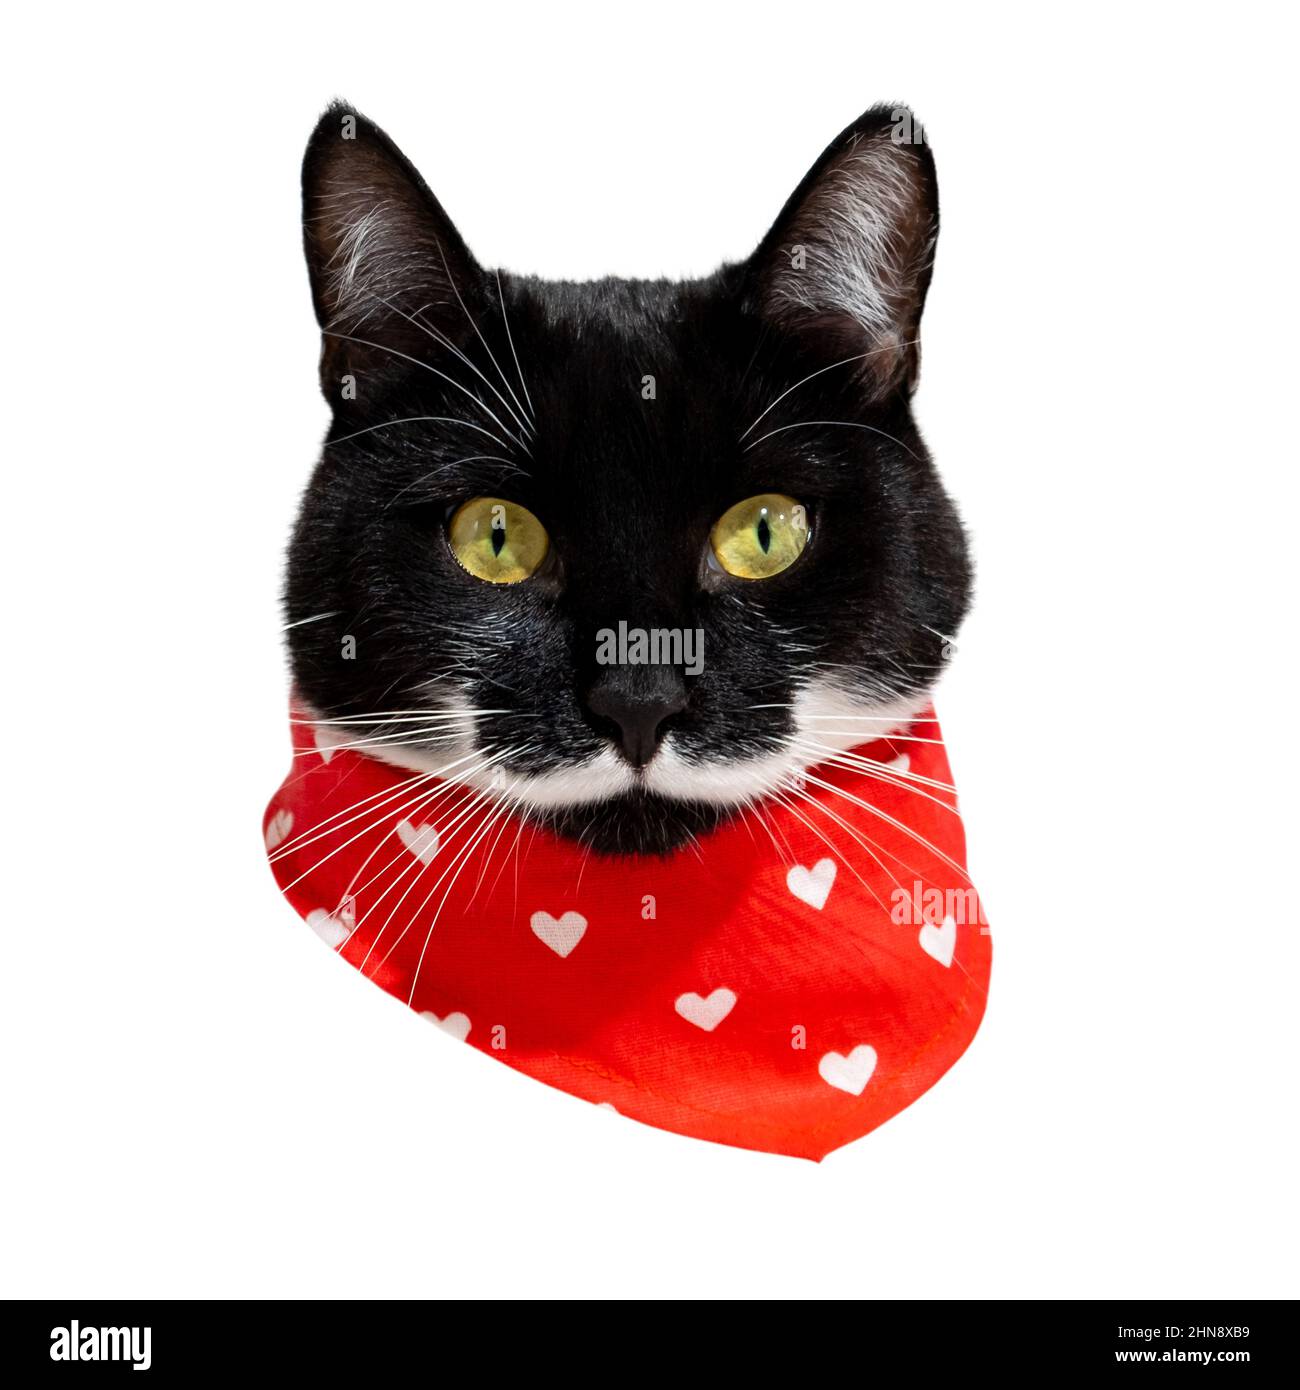 Head of black cat with white mustache in red bandana or neckerchief isolated on white background for collages or gifs. Unusual color pet. Cat portrait Stock Photo